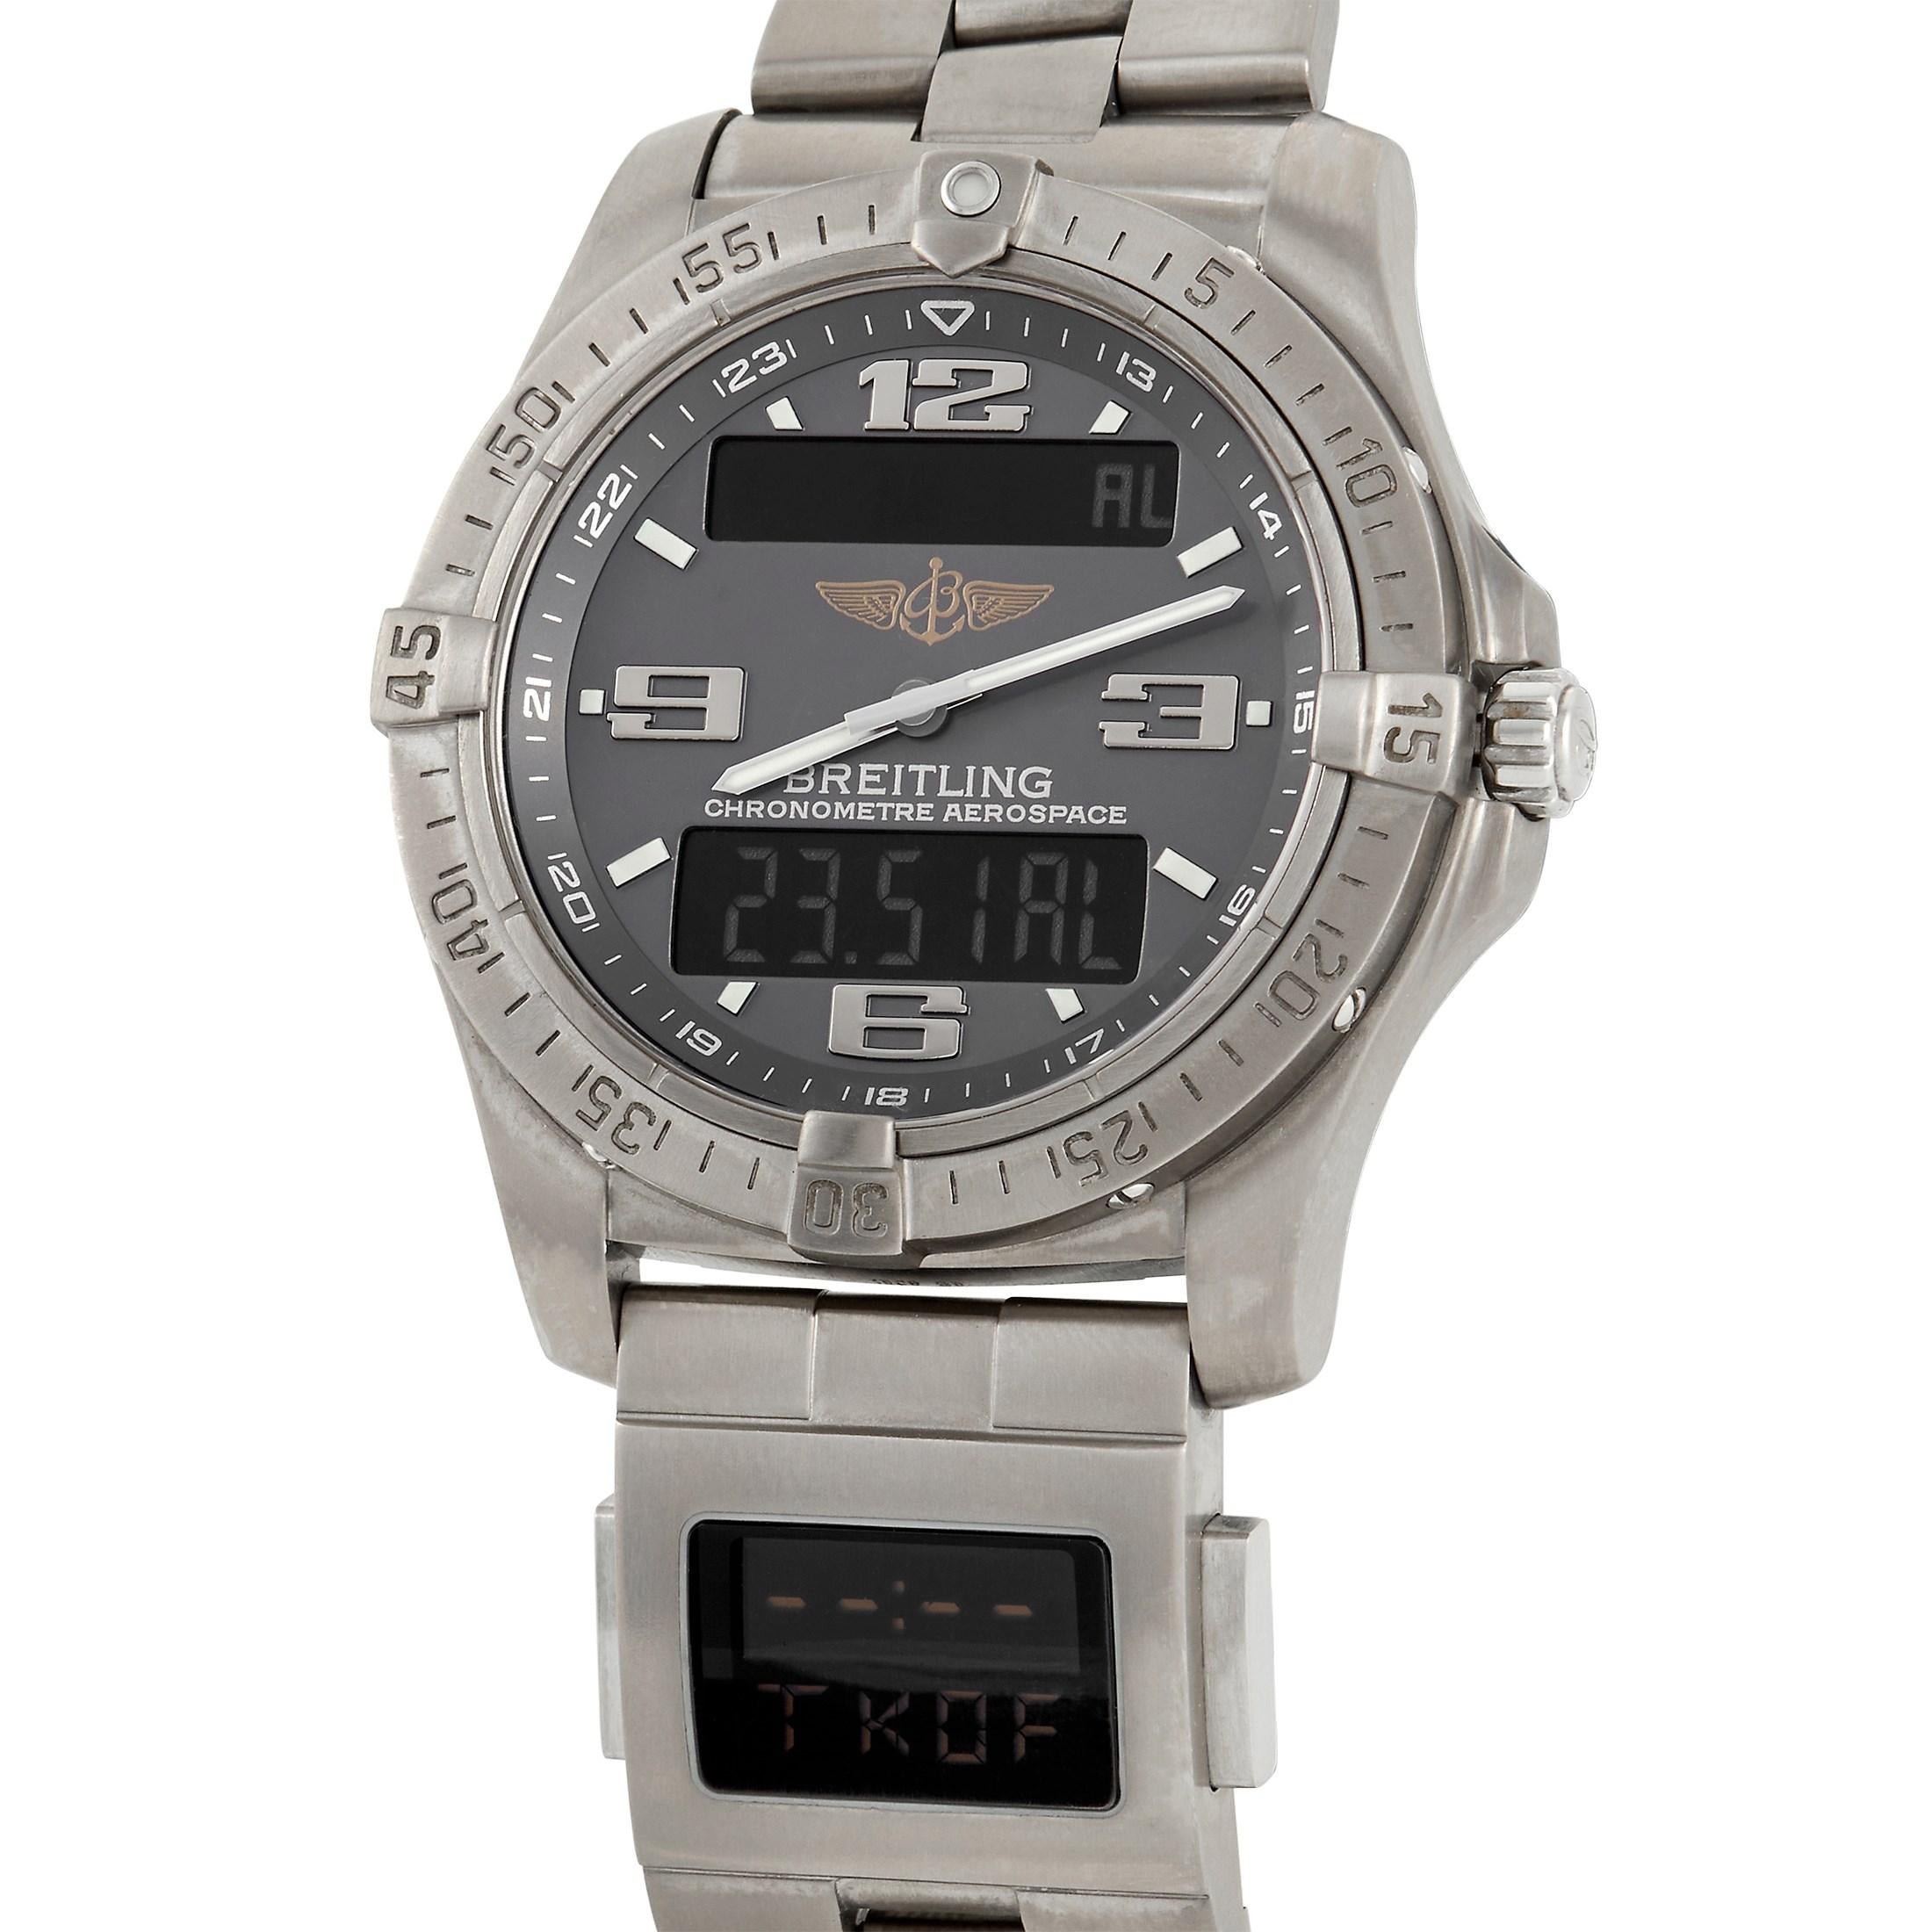 This Aerospace Advantage Co-Pilot Watch from Breitling is perfect for private and professional pilots who demand more from their wristwatch than simply telling the time and date. Designed with SuperQuartz movement and a titanium case, the Aerospace